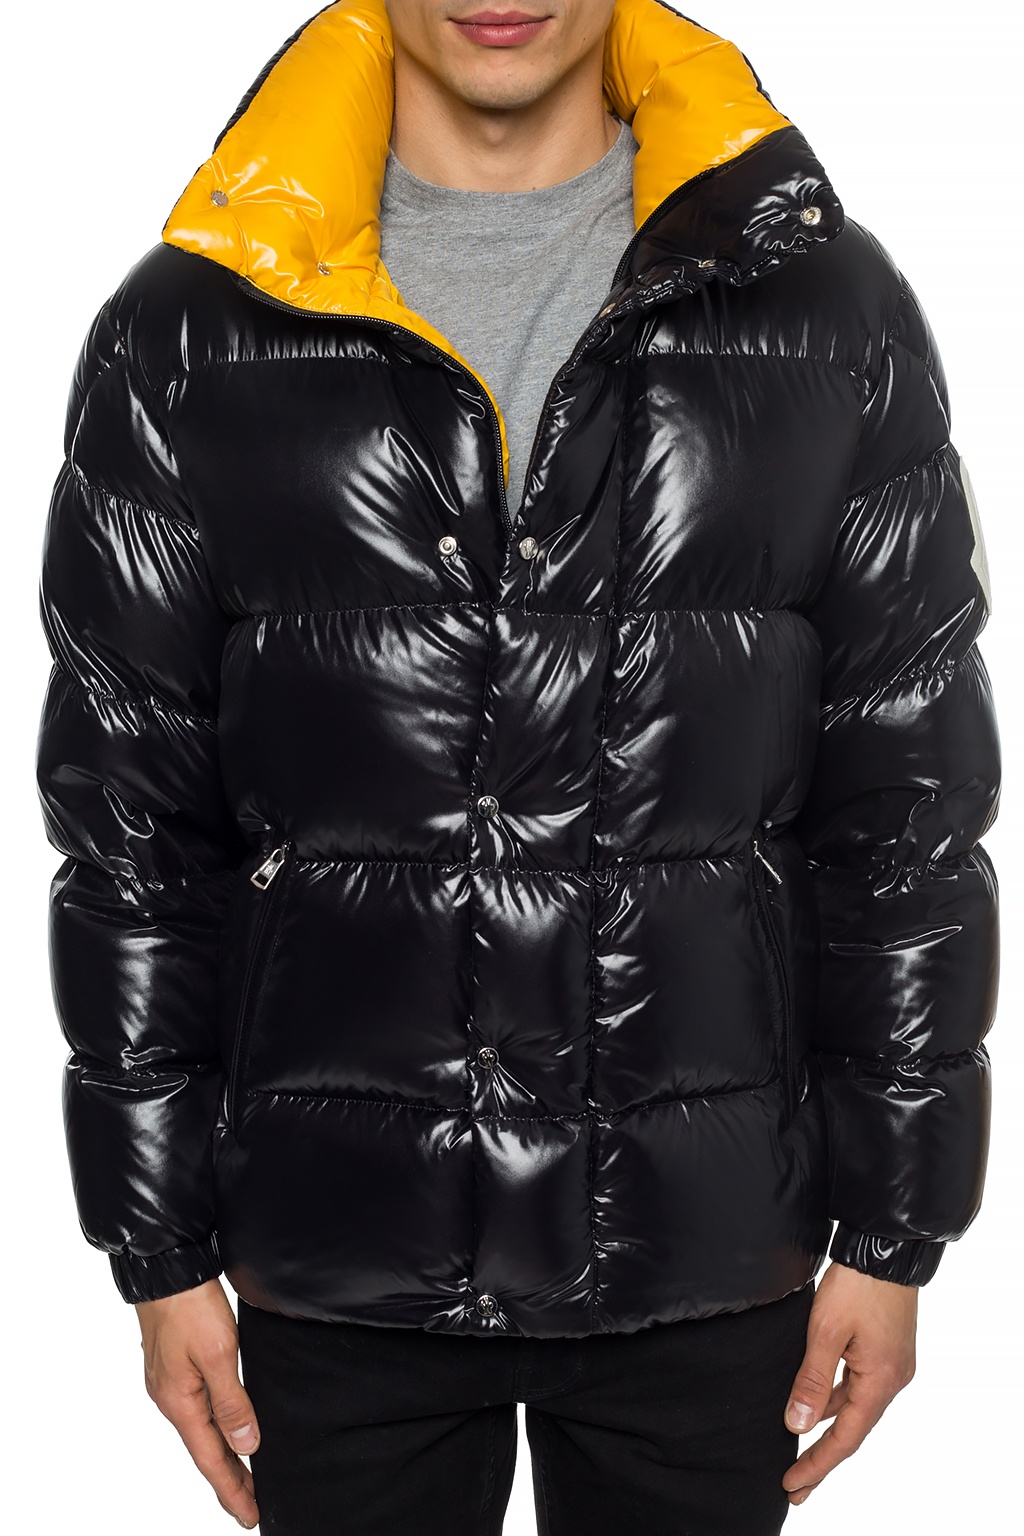 moncler tracksuit black and yellow